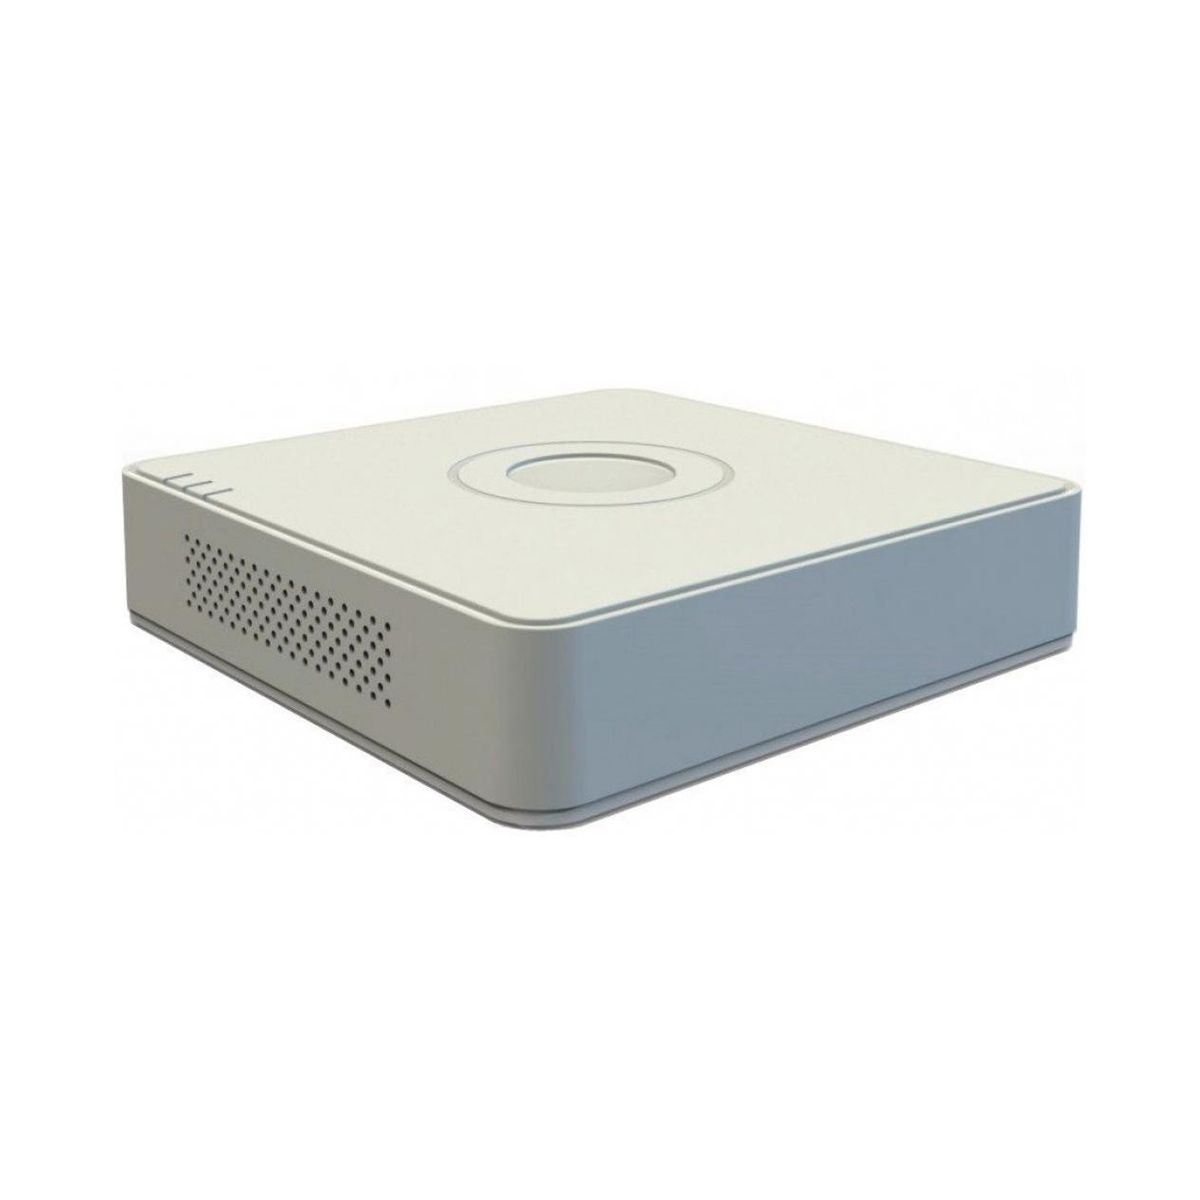 NVR Hikvision 4 canales DS-7104NI-E1/4P